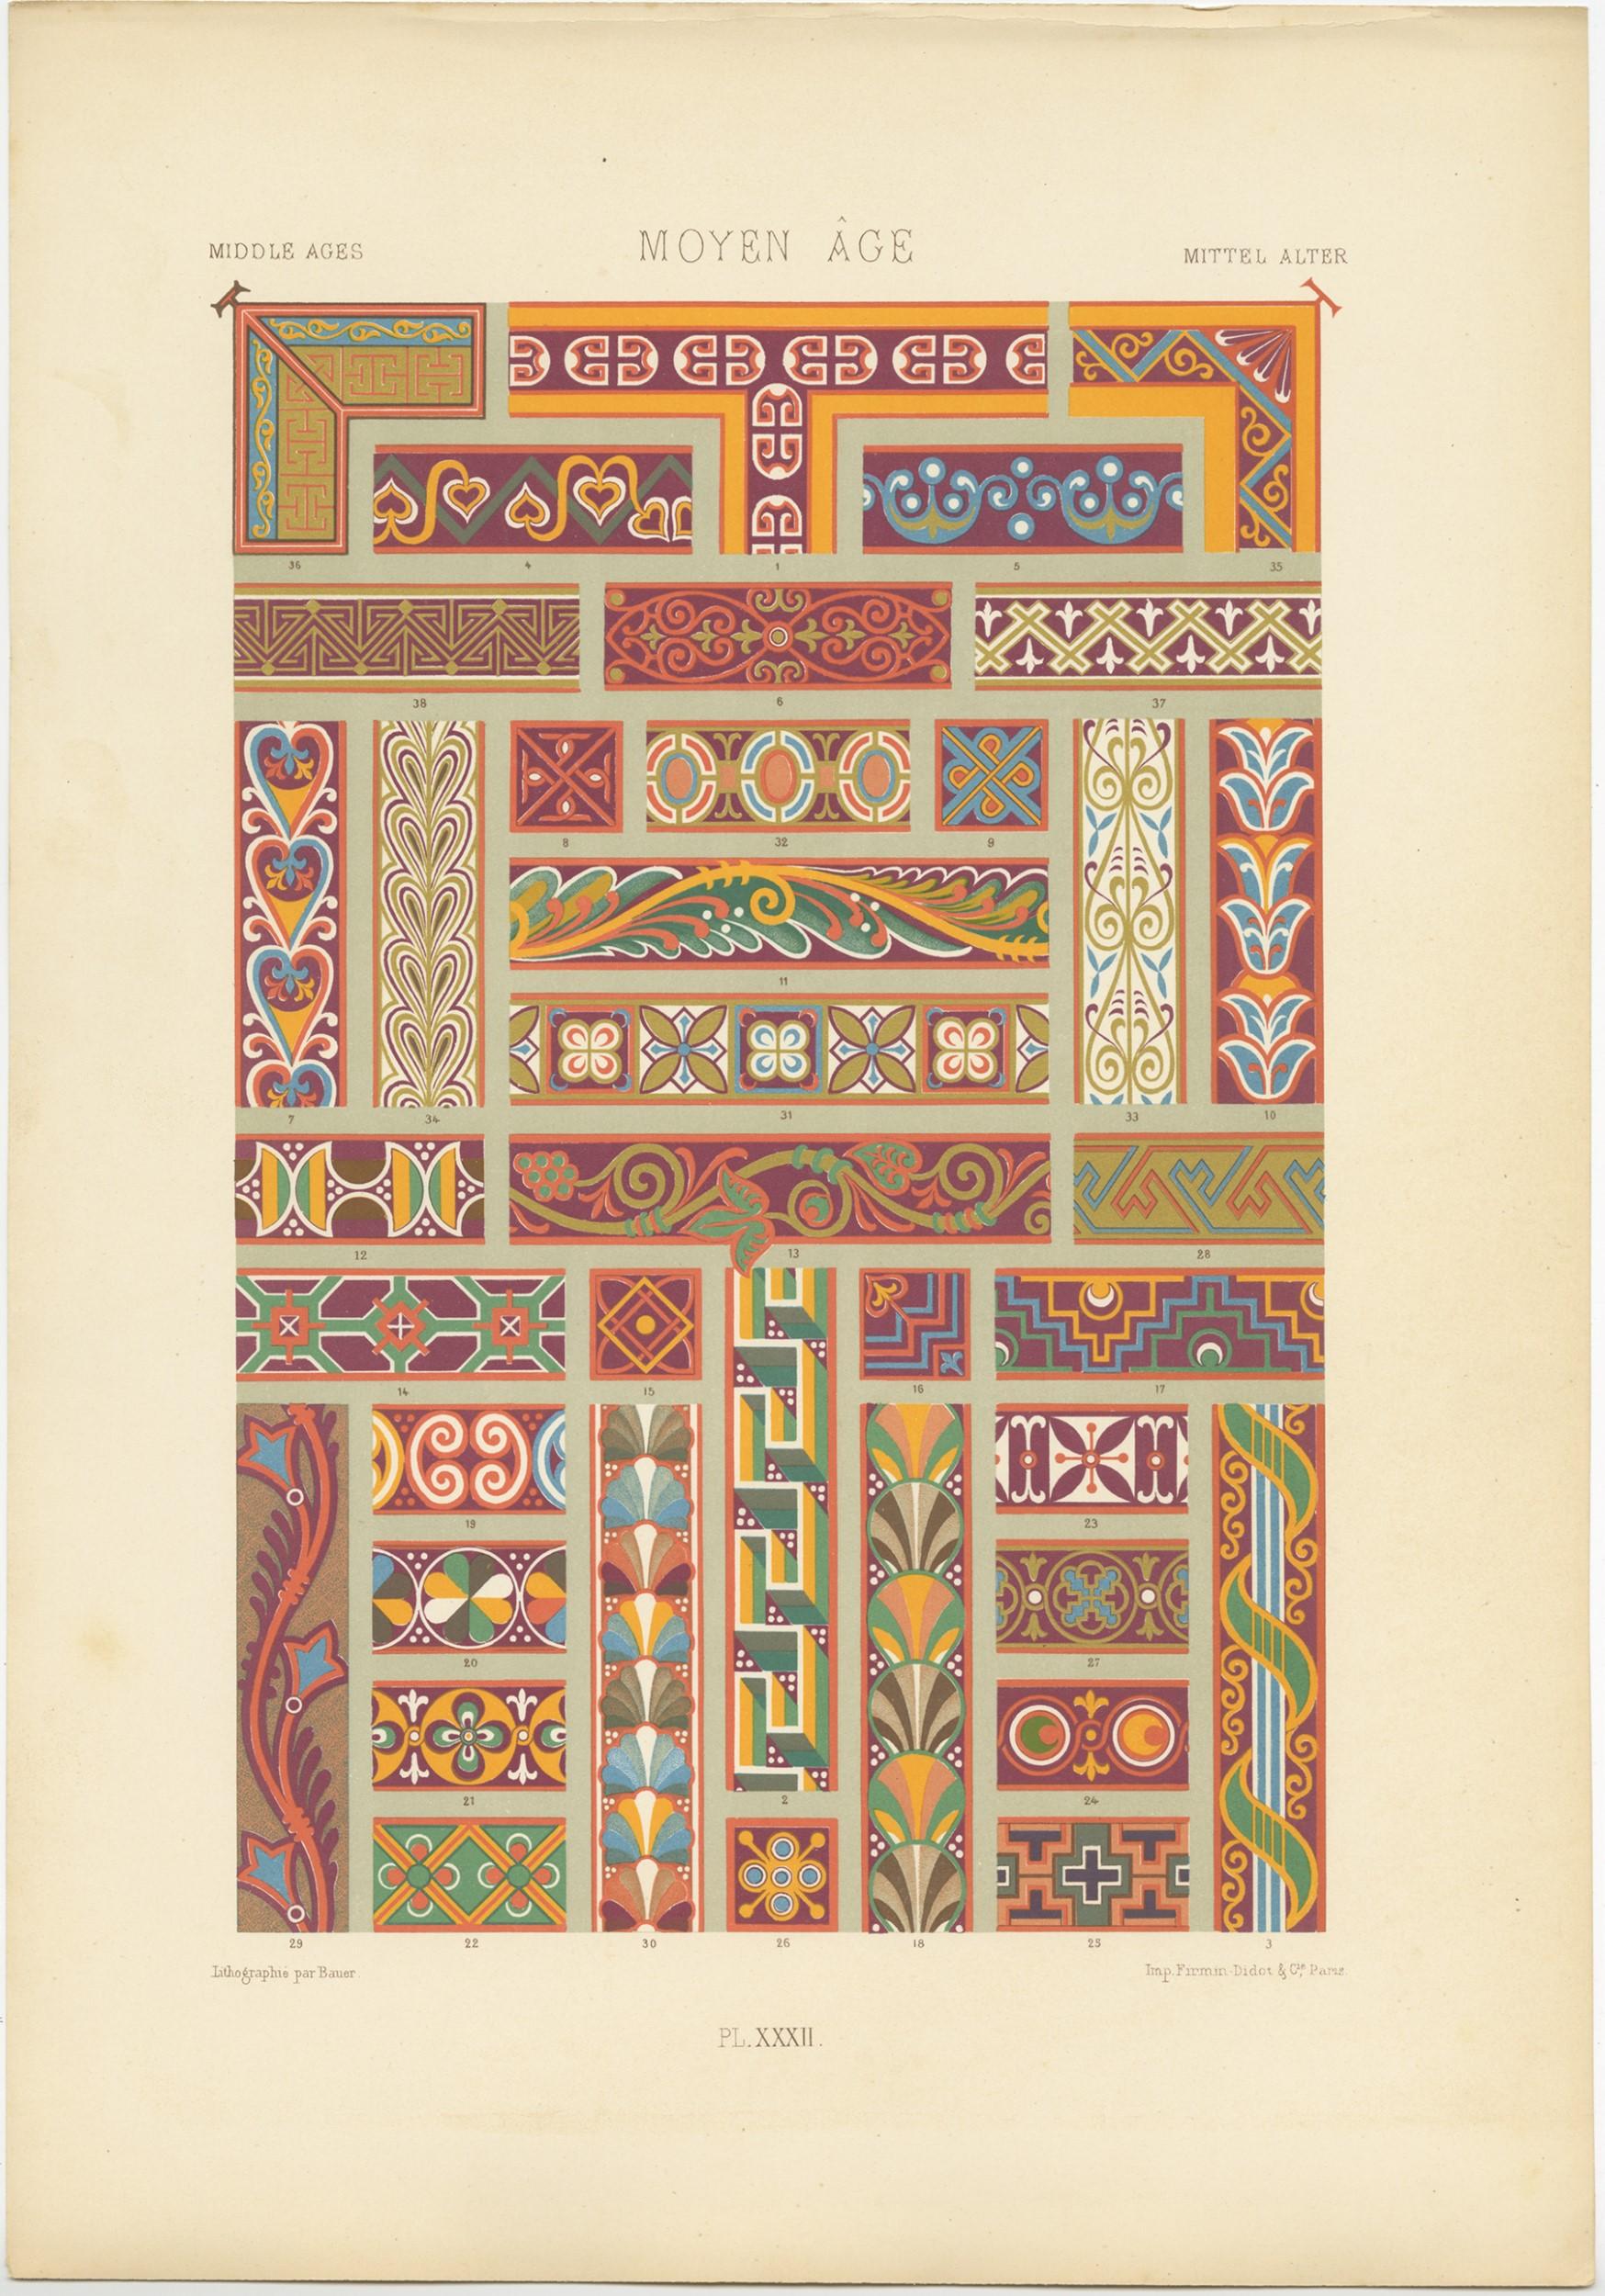 Antique print titled 'Middle Ages - Moyen Âge - Mittel Alter'. Chromolithograph of Middle Ages ornaments and decorative arts. This print originates from 'l'Ornement Polychrome' by Auguste Racinet. Published circa 1890.